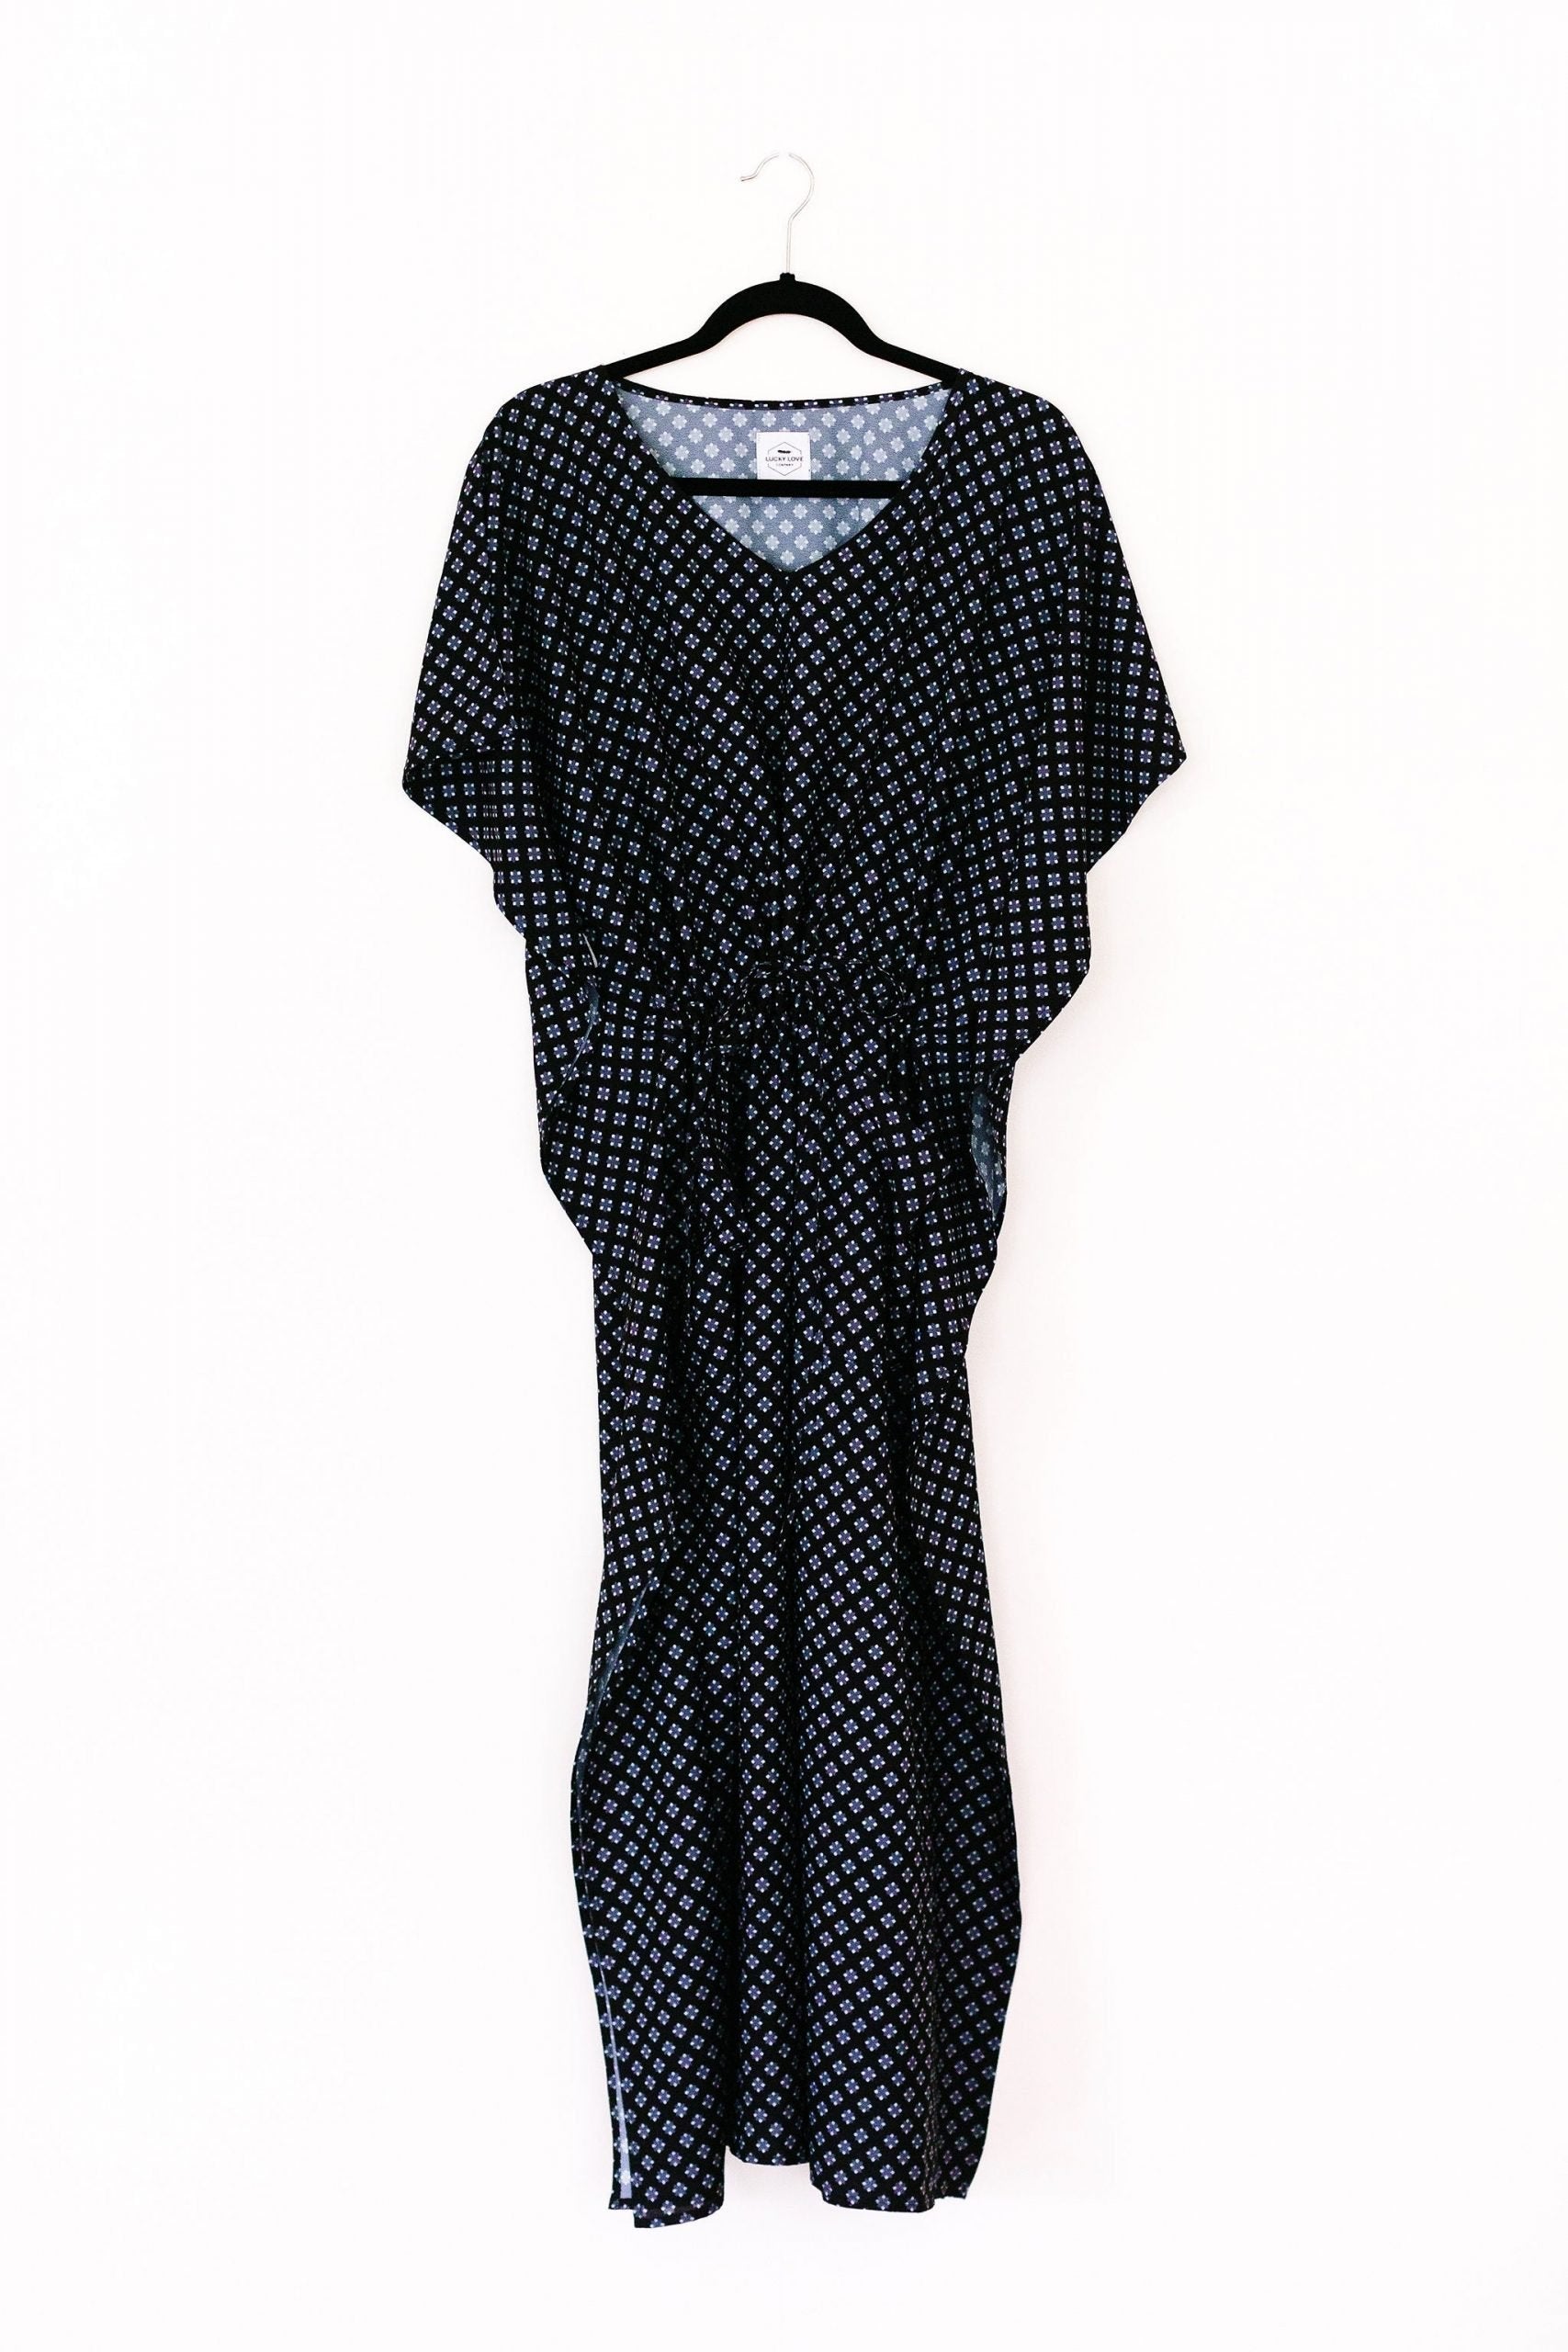 MAREN House Dress / Lightweight Soft Synthetic Silk / Effortless and Easy